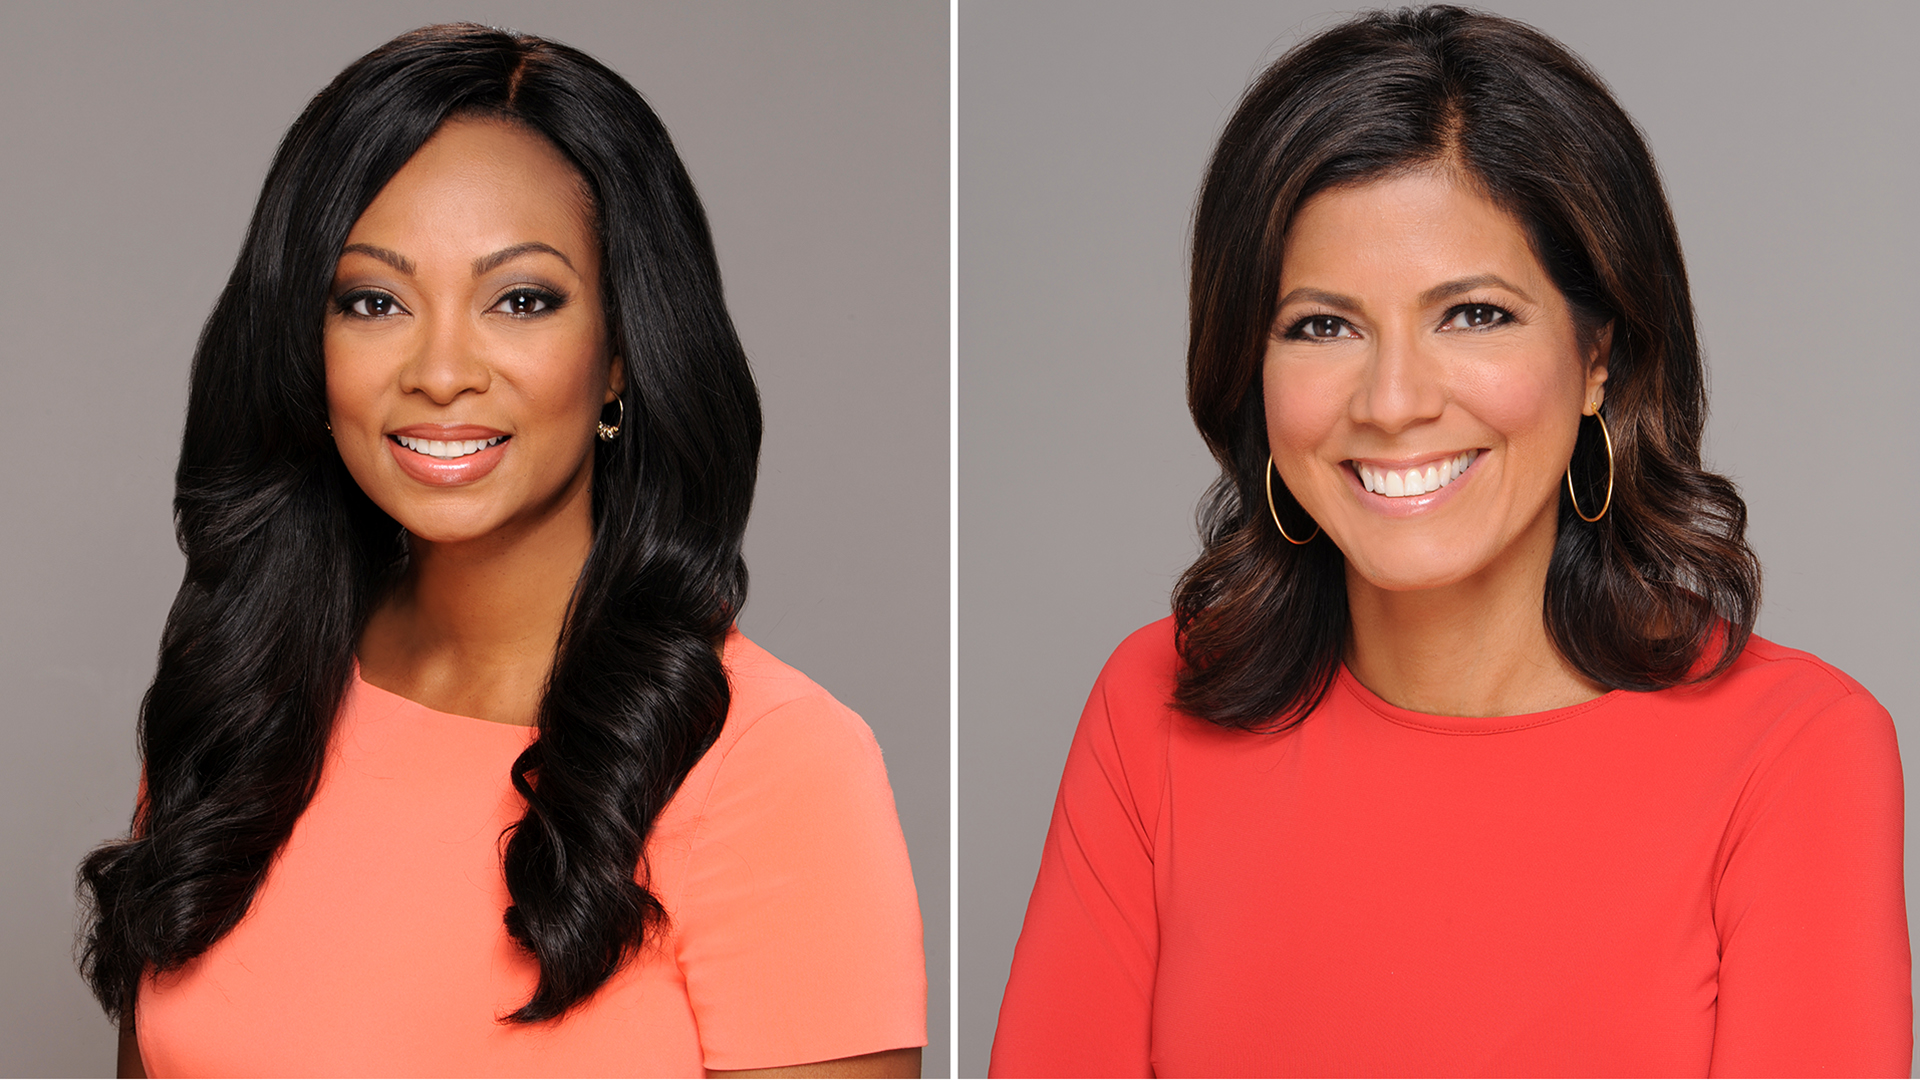 NBC 5 is shaking up its early morning news lineup, pairing Michelle Relerfo...